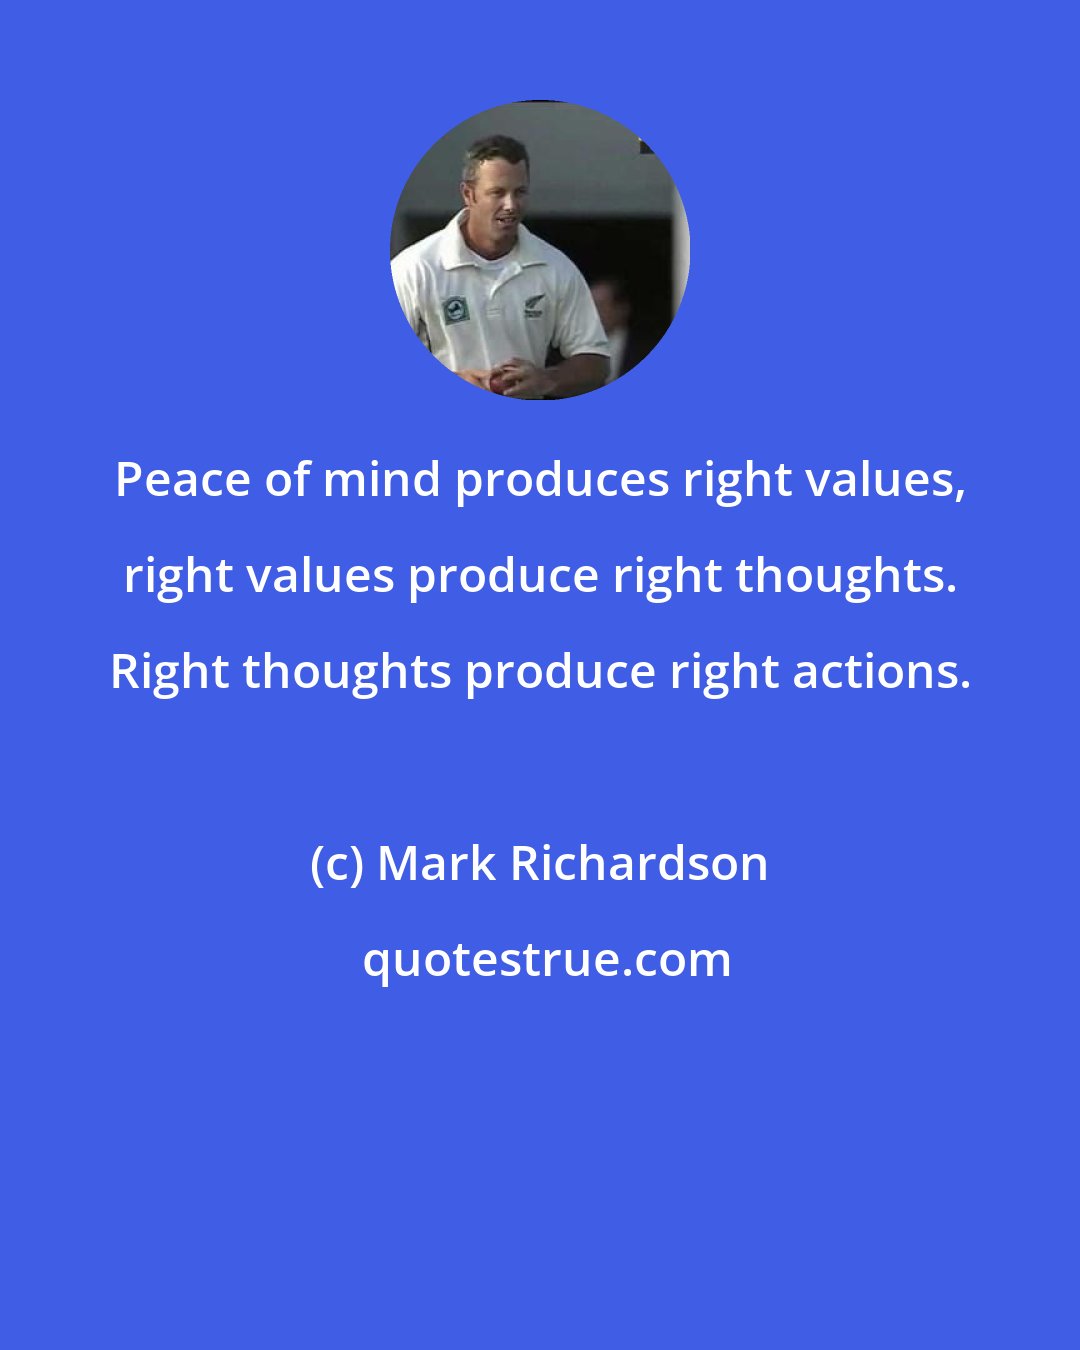 Mark Richardson: Peace of mind produces right values, right values produce right thoughts. Right thoughts produce right actions.